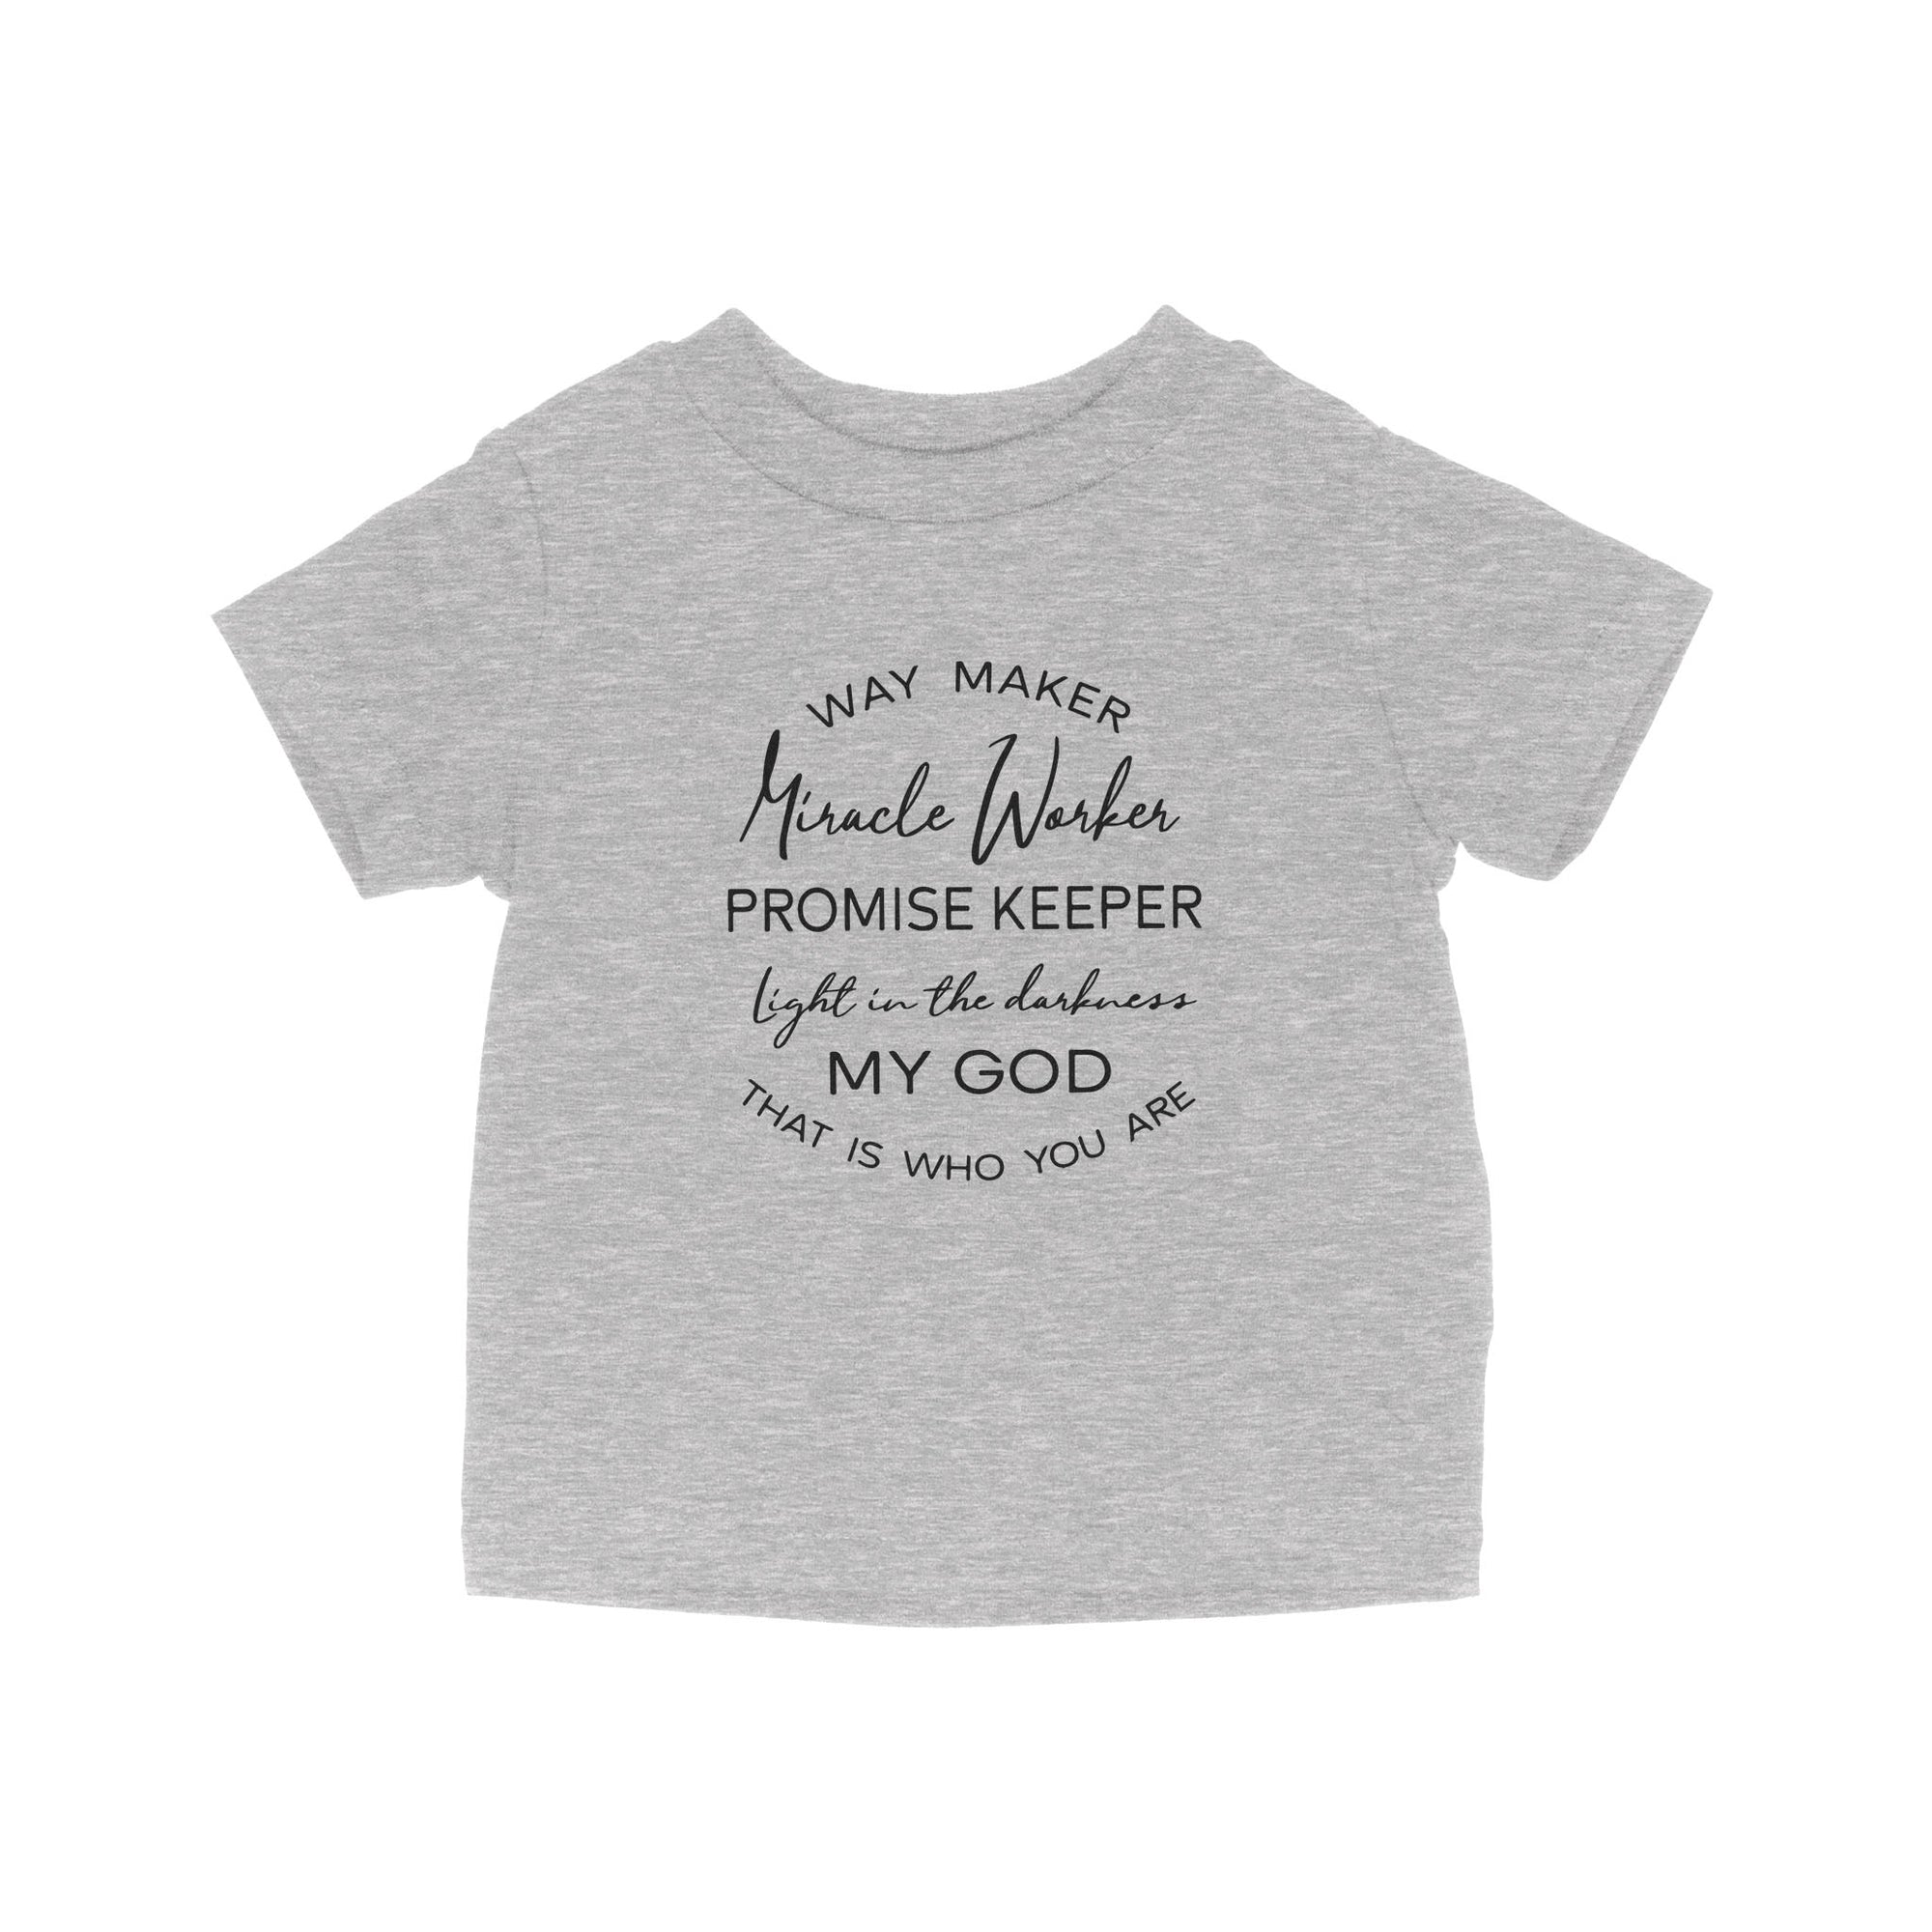 Way Maker Miracle Worker Promise Keeper Light In The Darkness My God That Is Who You Are - Baby T-Shirt